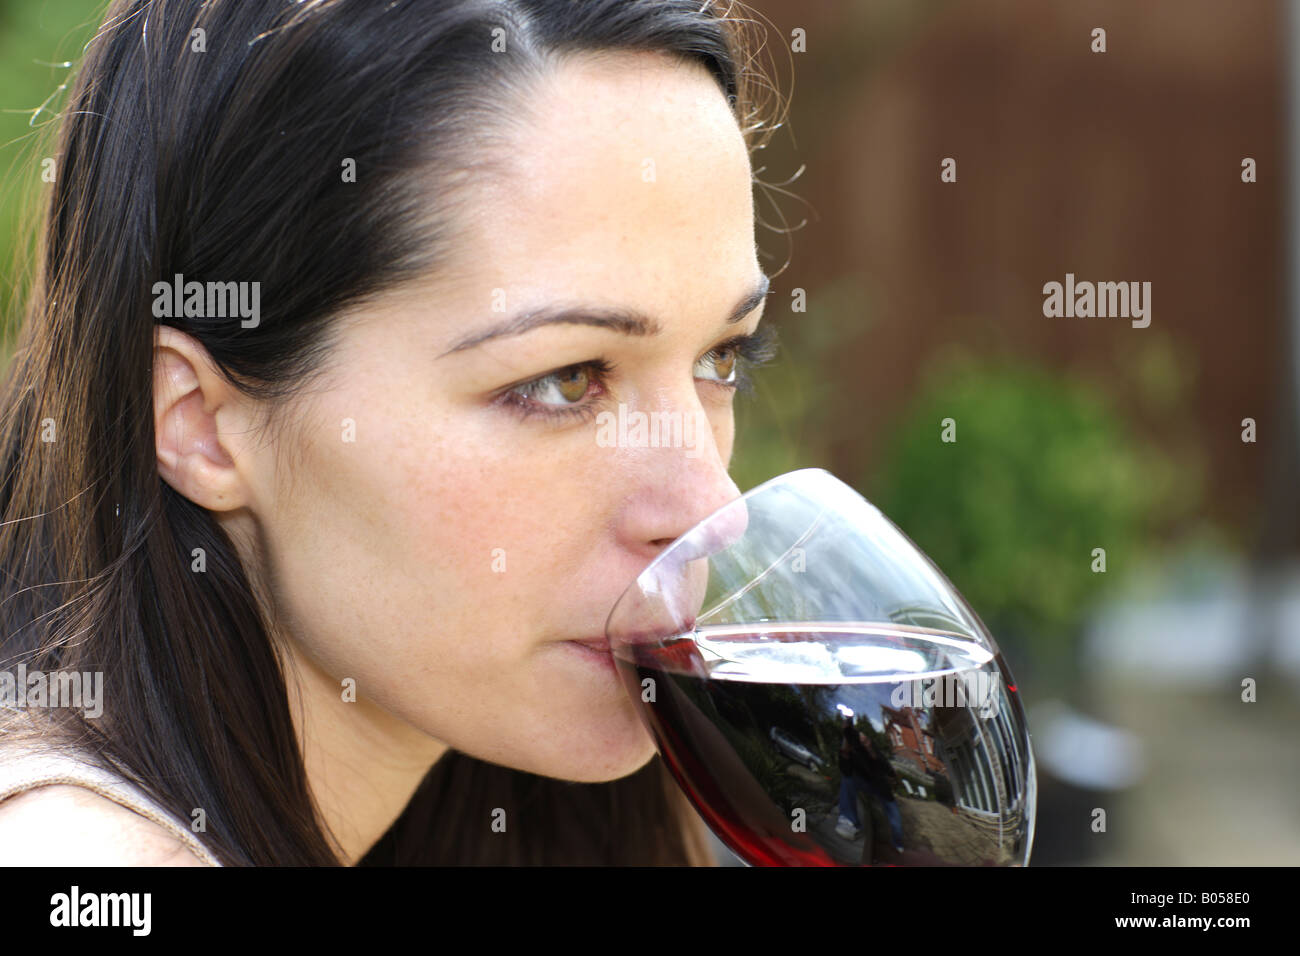 Young Woman Sitting In Her Garden Alone Holding And Drinking A Glass Of Red Wine Stock Photo